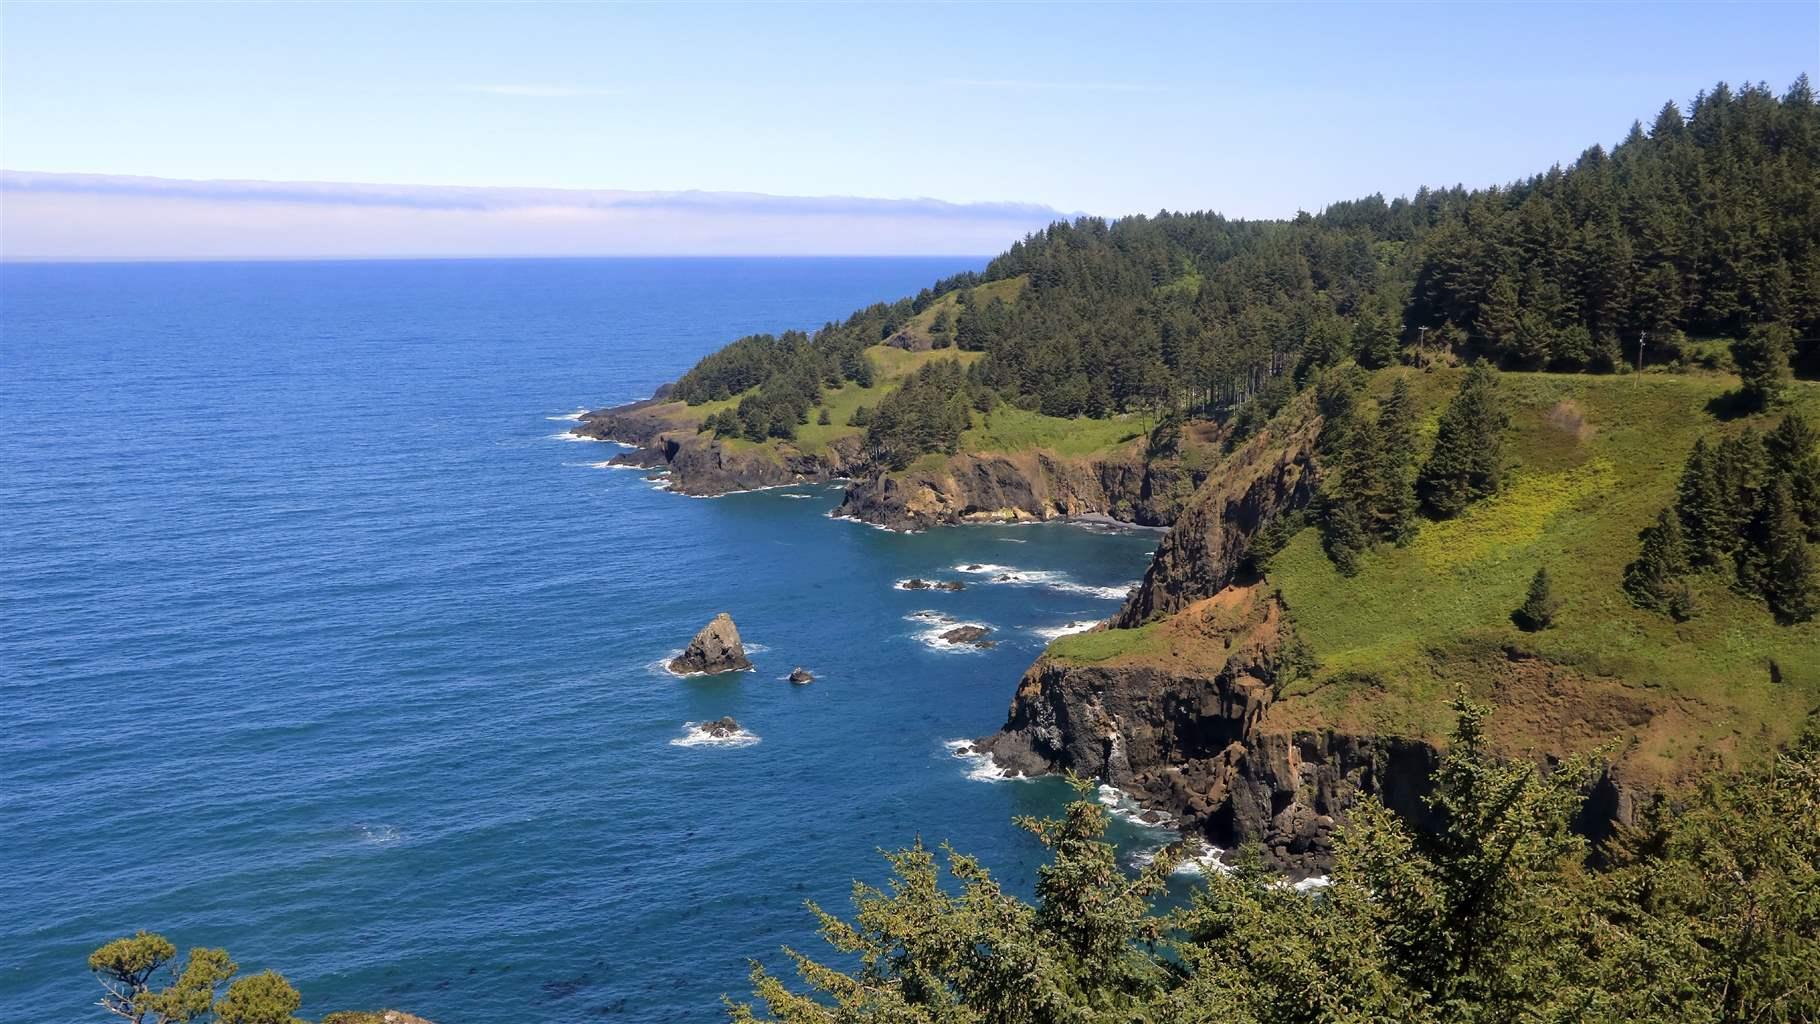 Cape Foulweather offers captivating vistas that often include gray whales feeding in offshore kelp beds, seabirds resting on sheer cliffs, and waves pounding on rocks.